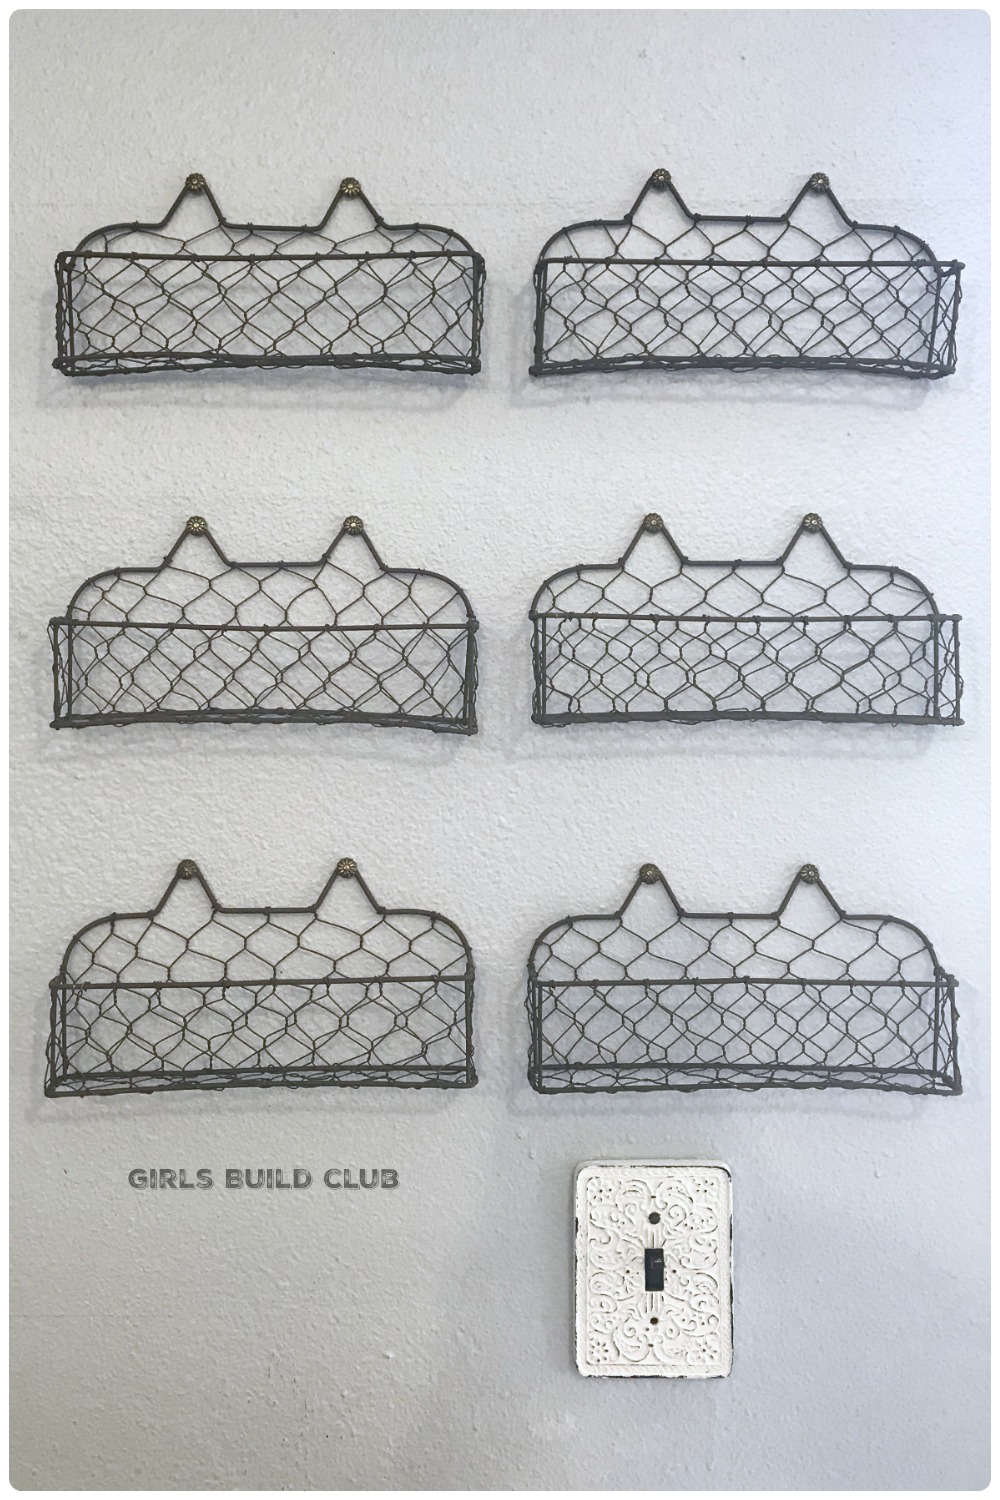 I just hung a bunch of these cute farmhouse wire baskets in my craft room and now they hold all my little bottles of craft paint! Love finding easy cheap ways to de-clutter!